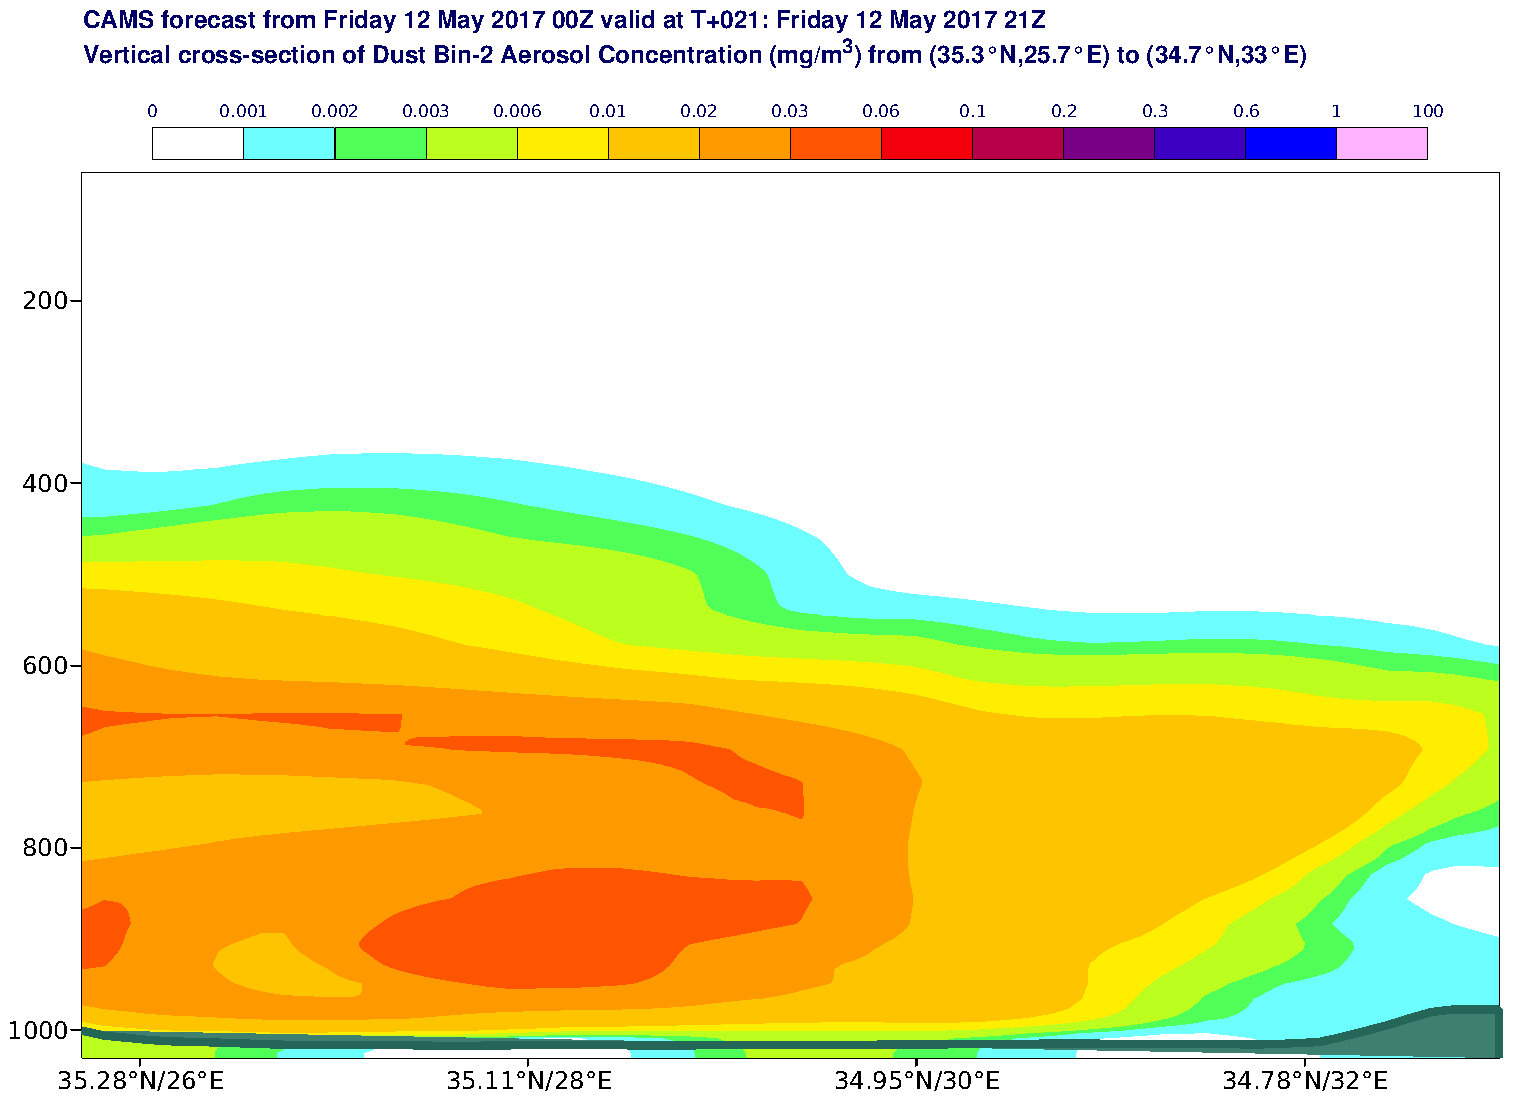 Vertical cross-section of Dust Bin-2 Aerosol Concentration (mg/m3) valid at T21 - 2017-05-12 21:00